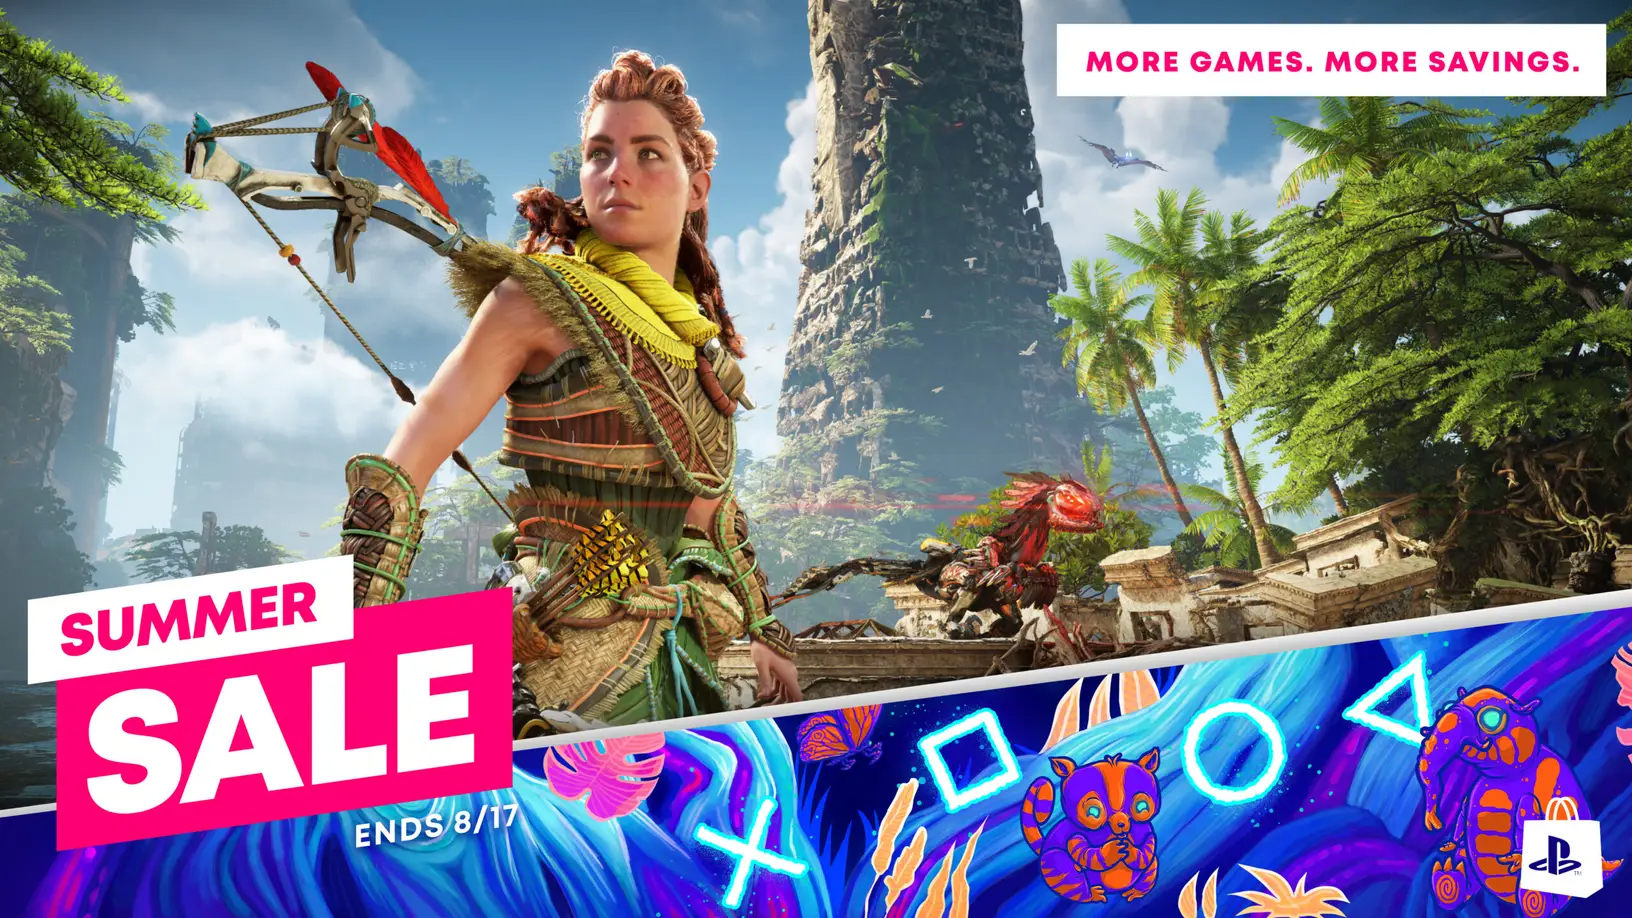 PlayStation’s Summer Sale part two is live now